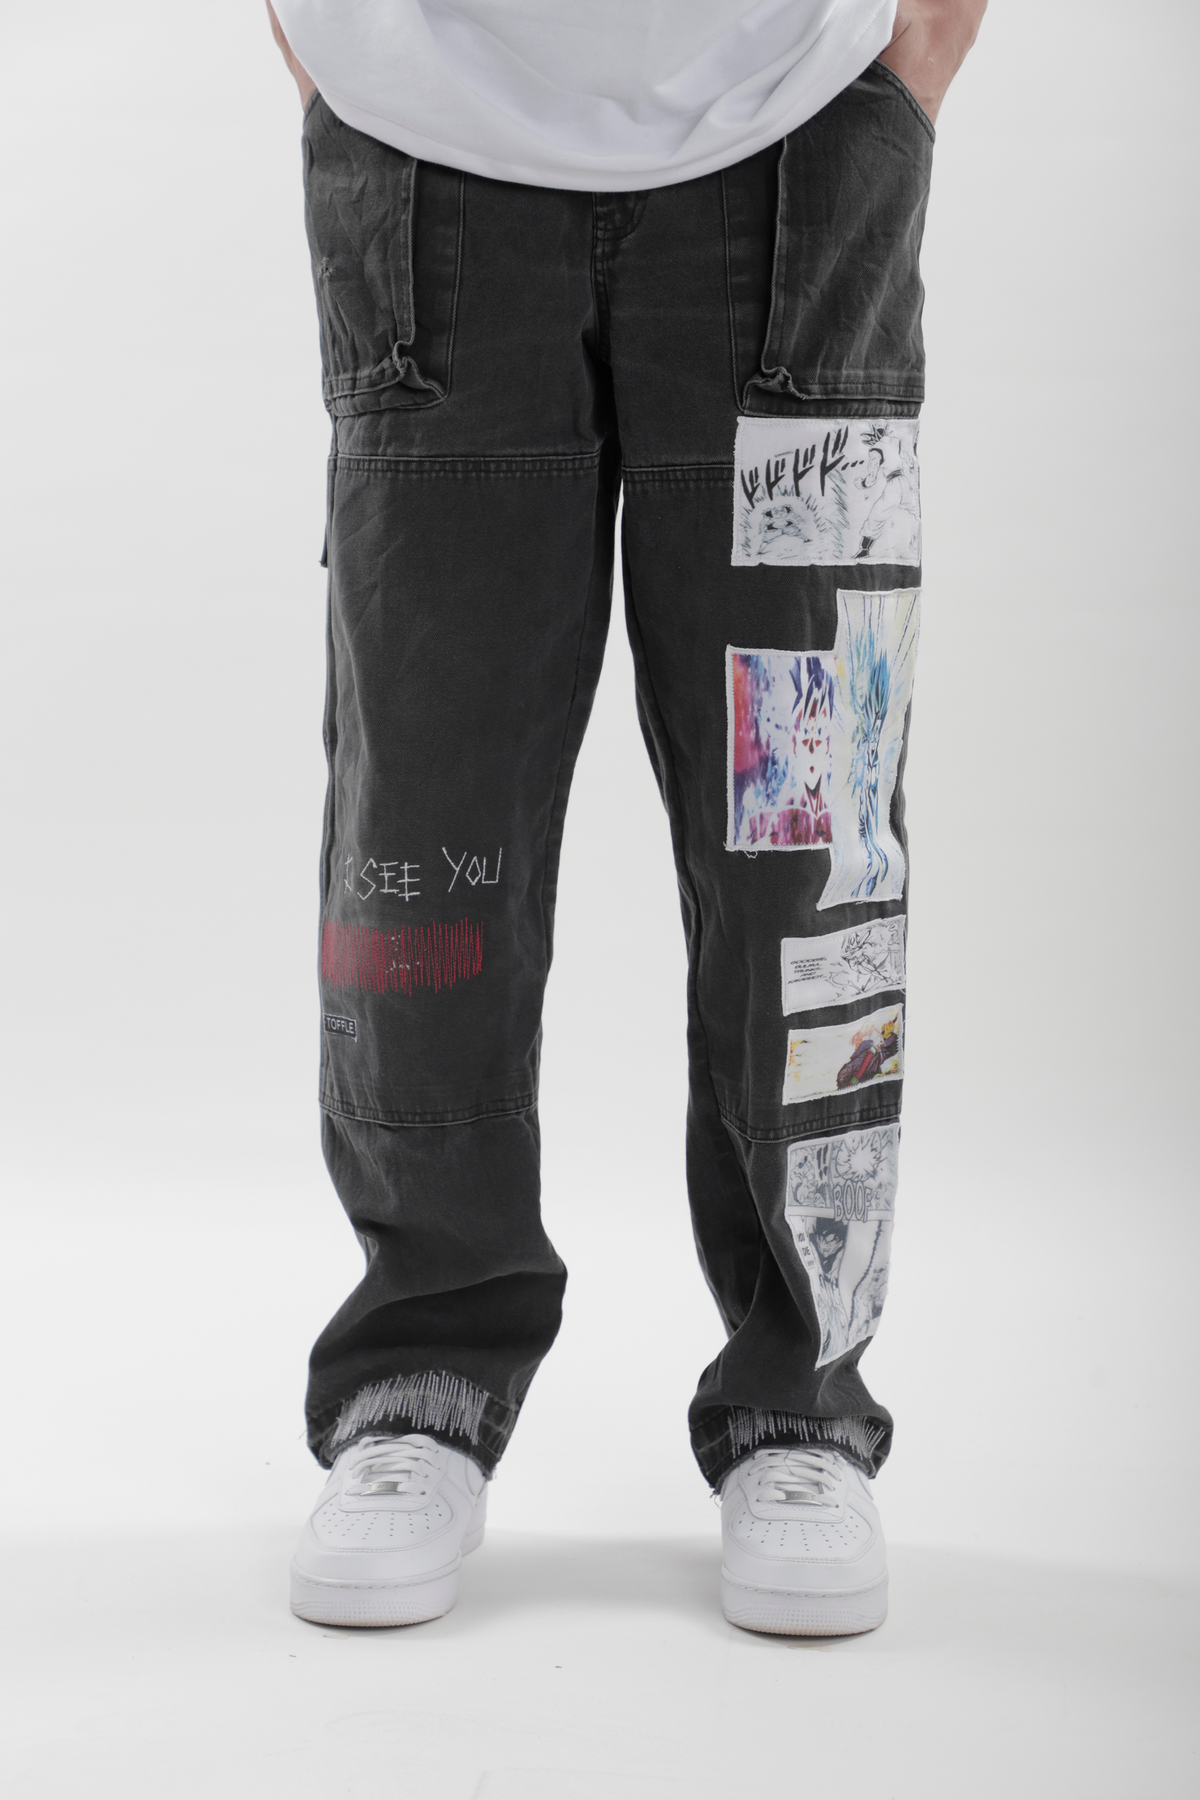 Earthtone Black Upcycled Denims, a product by TOFFLE